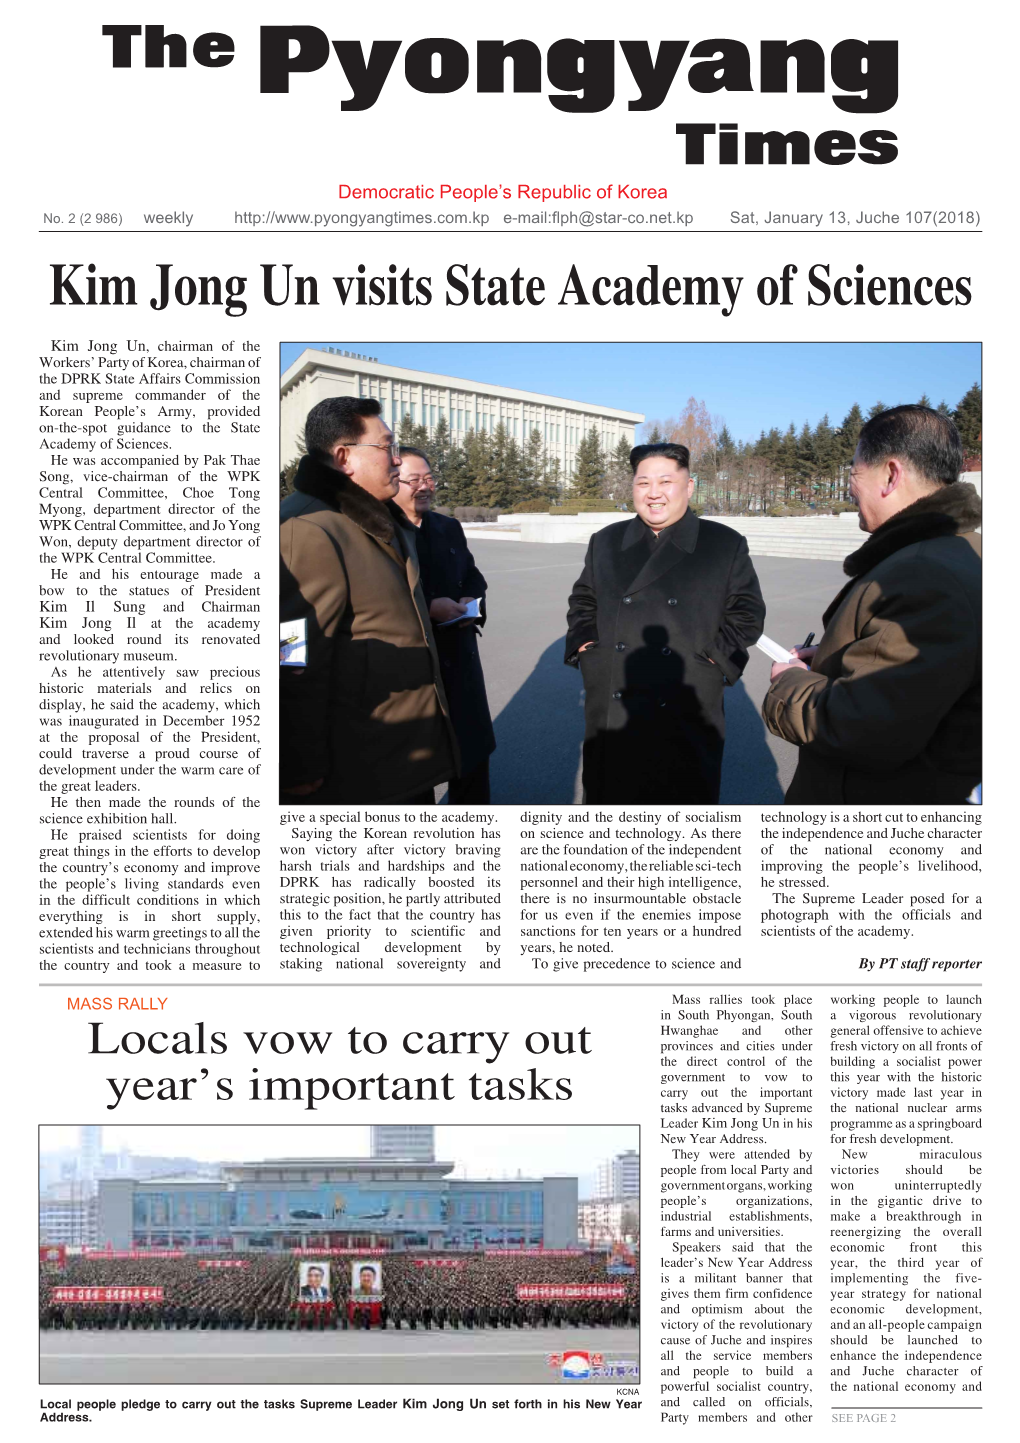 Kim Jong Un Visits State Academy of Sciences